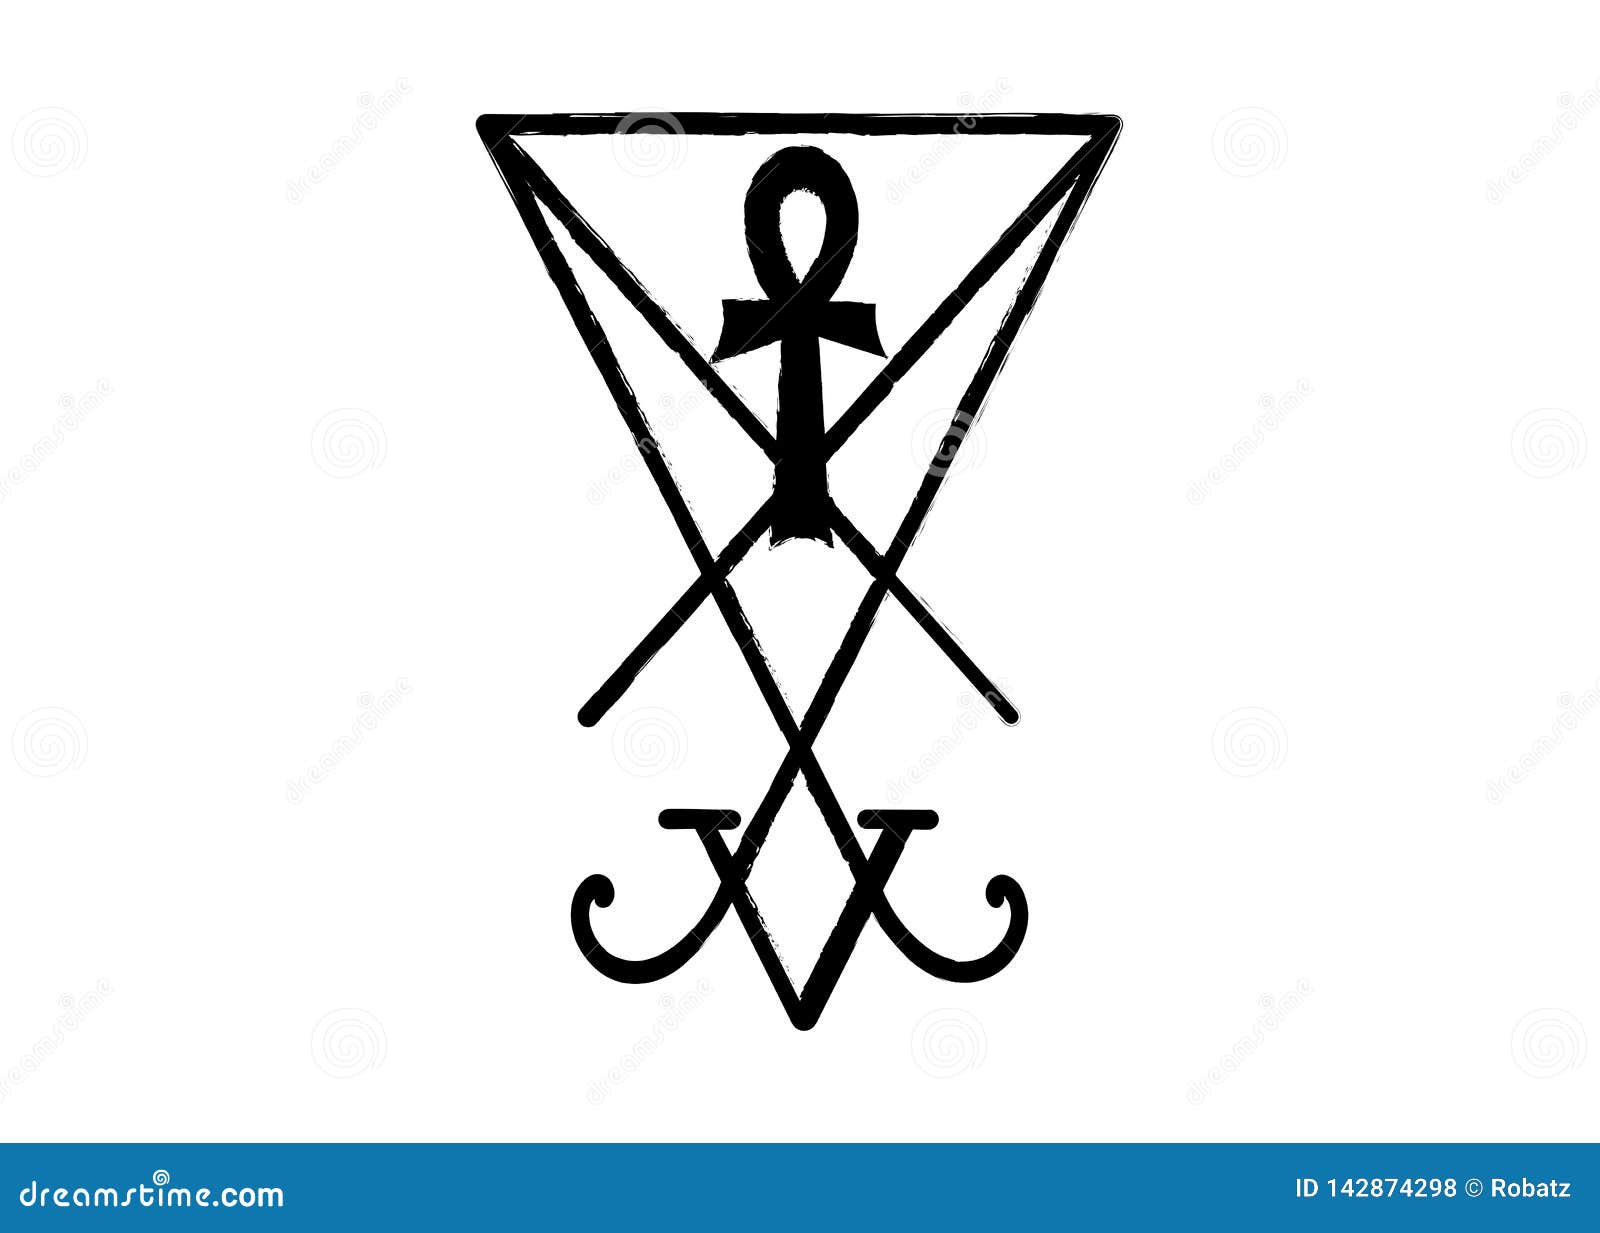 a sigil of lucifer. grunge styled distressed demonology and the ankh egyptian cross. lucifer sigil . satan devil lucifer